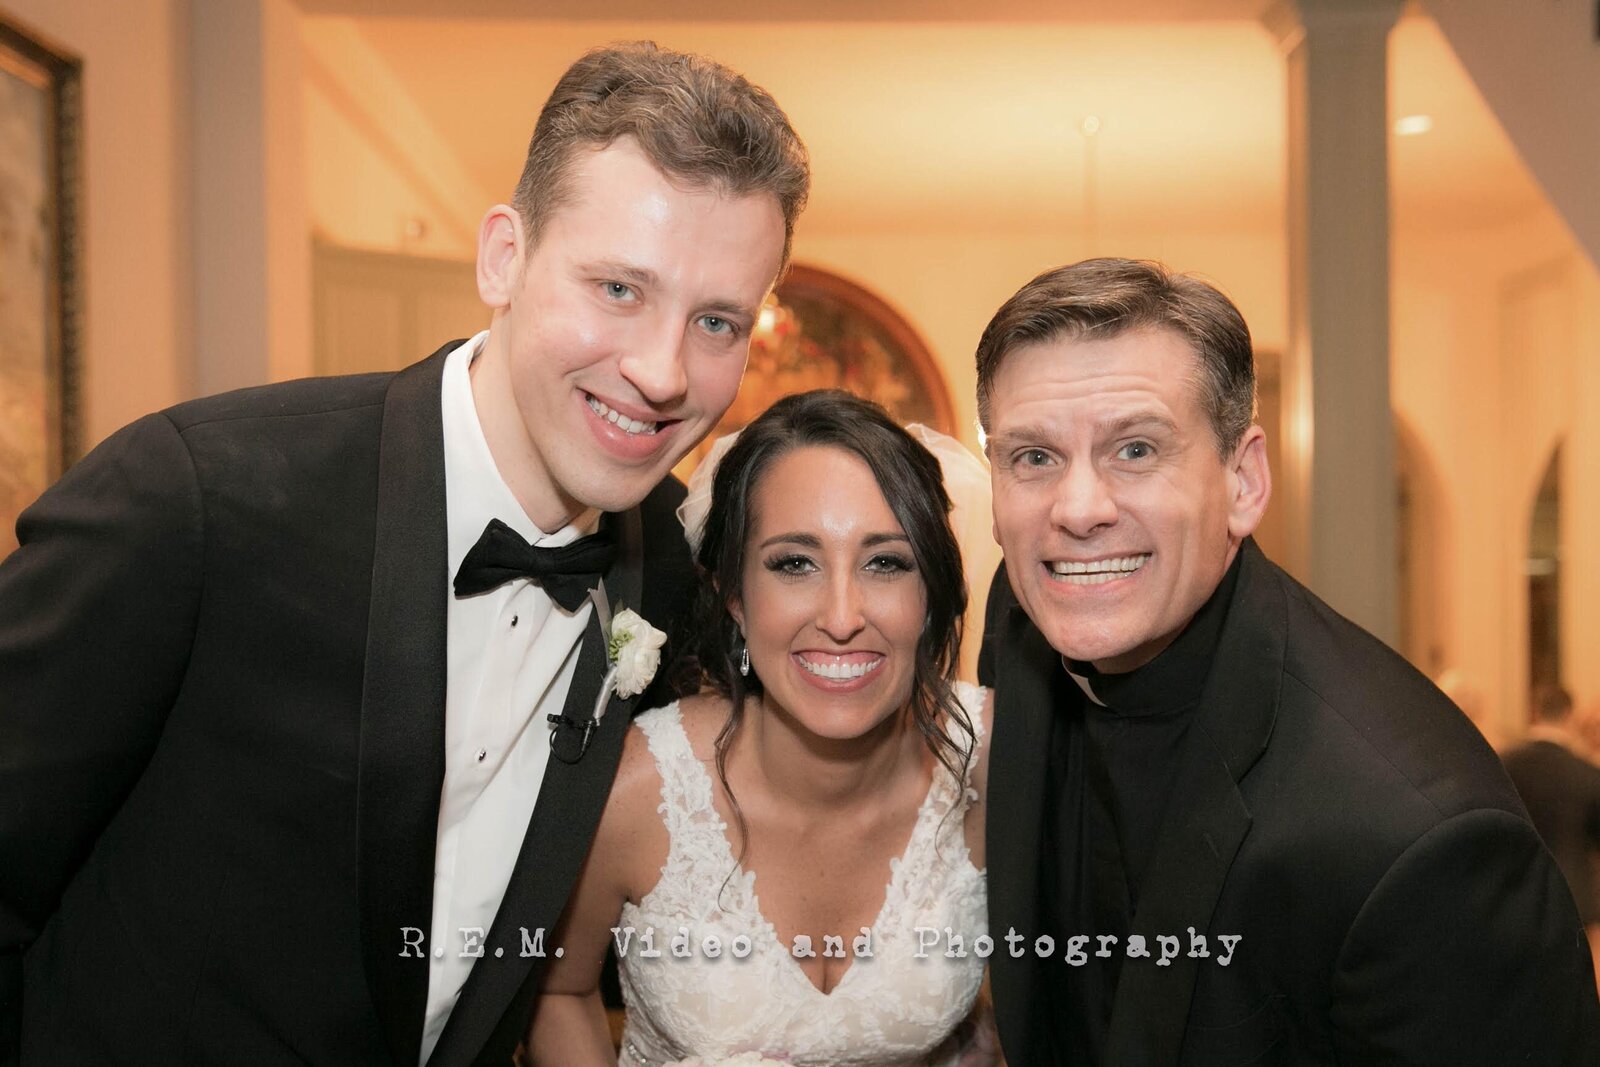 Bride, groom, and wedding officiant smile for portrait